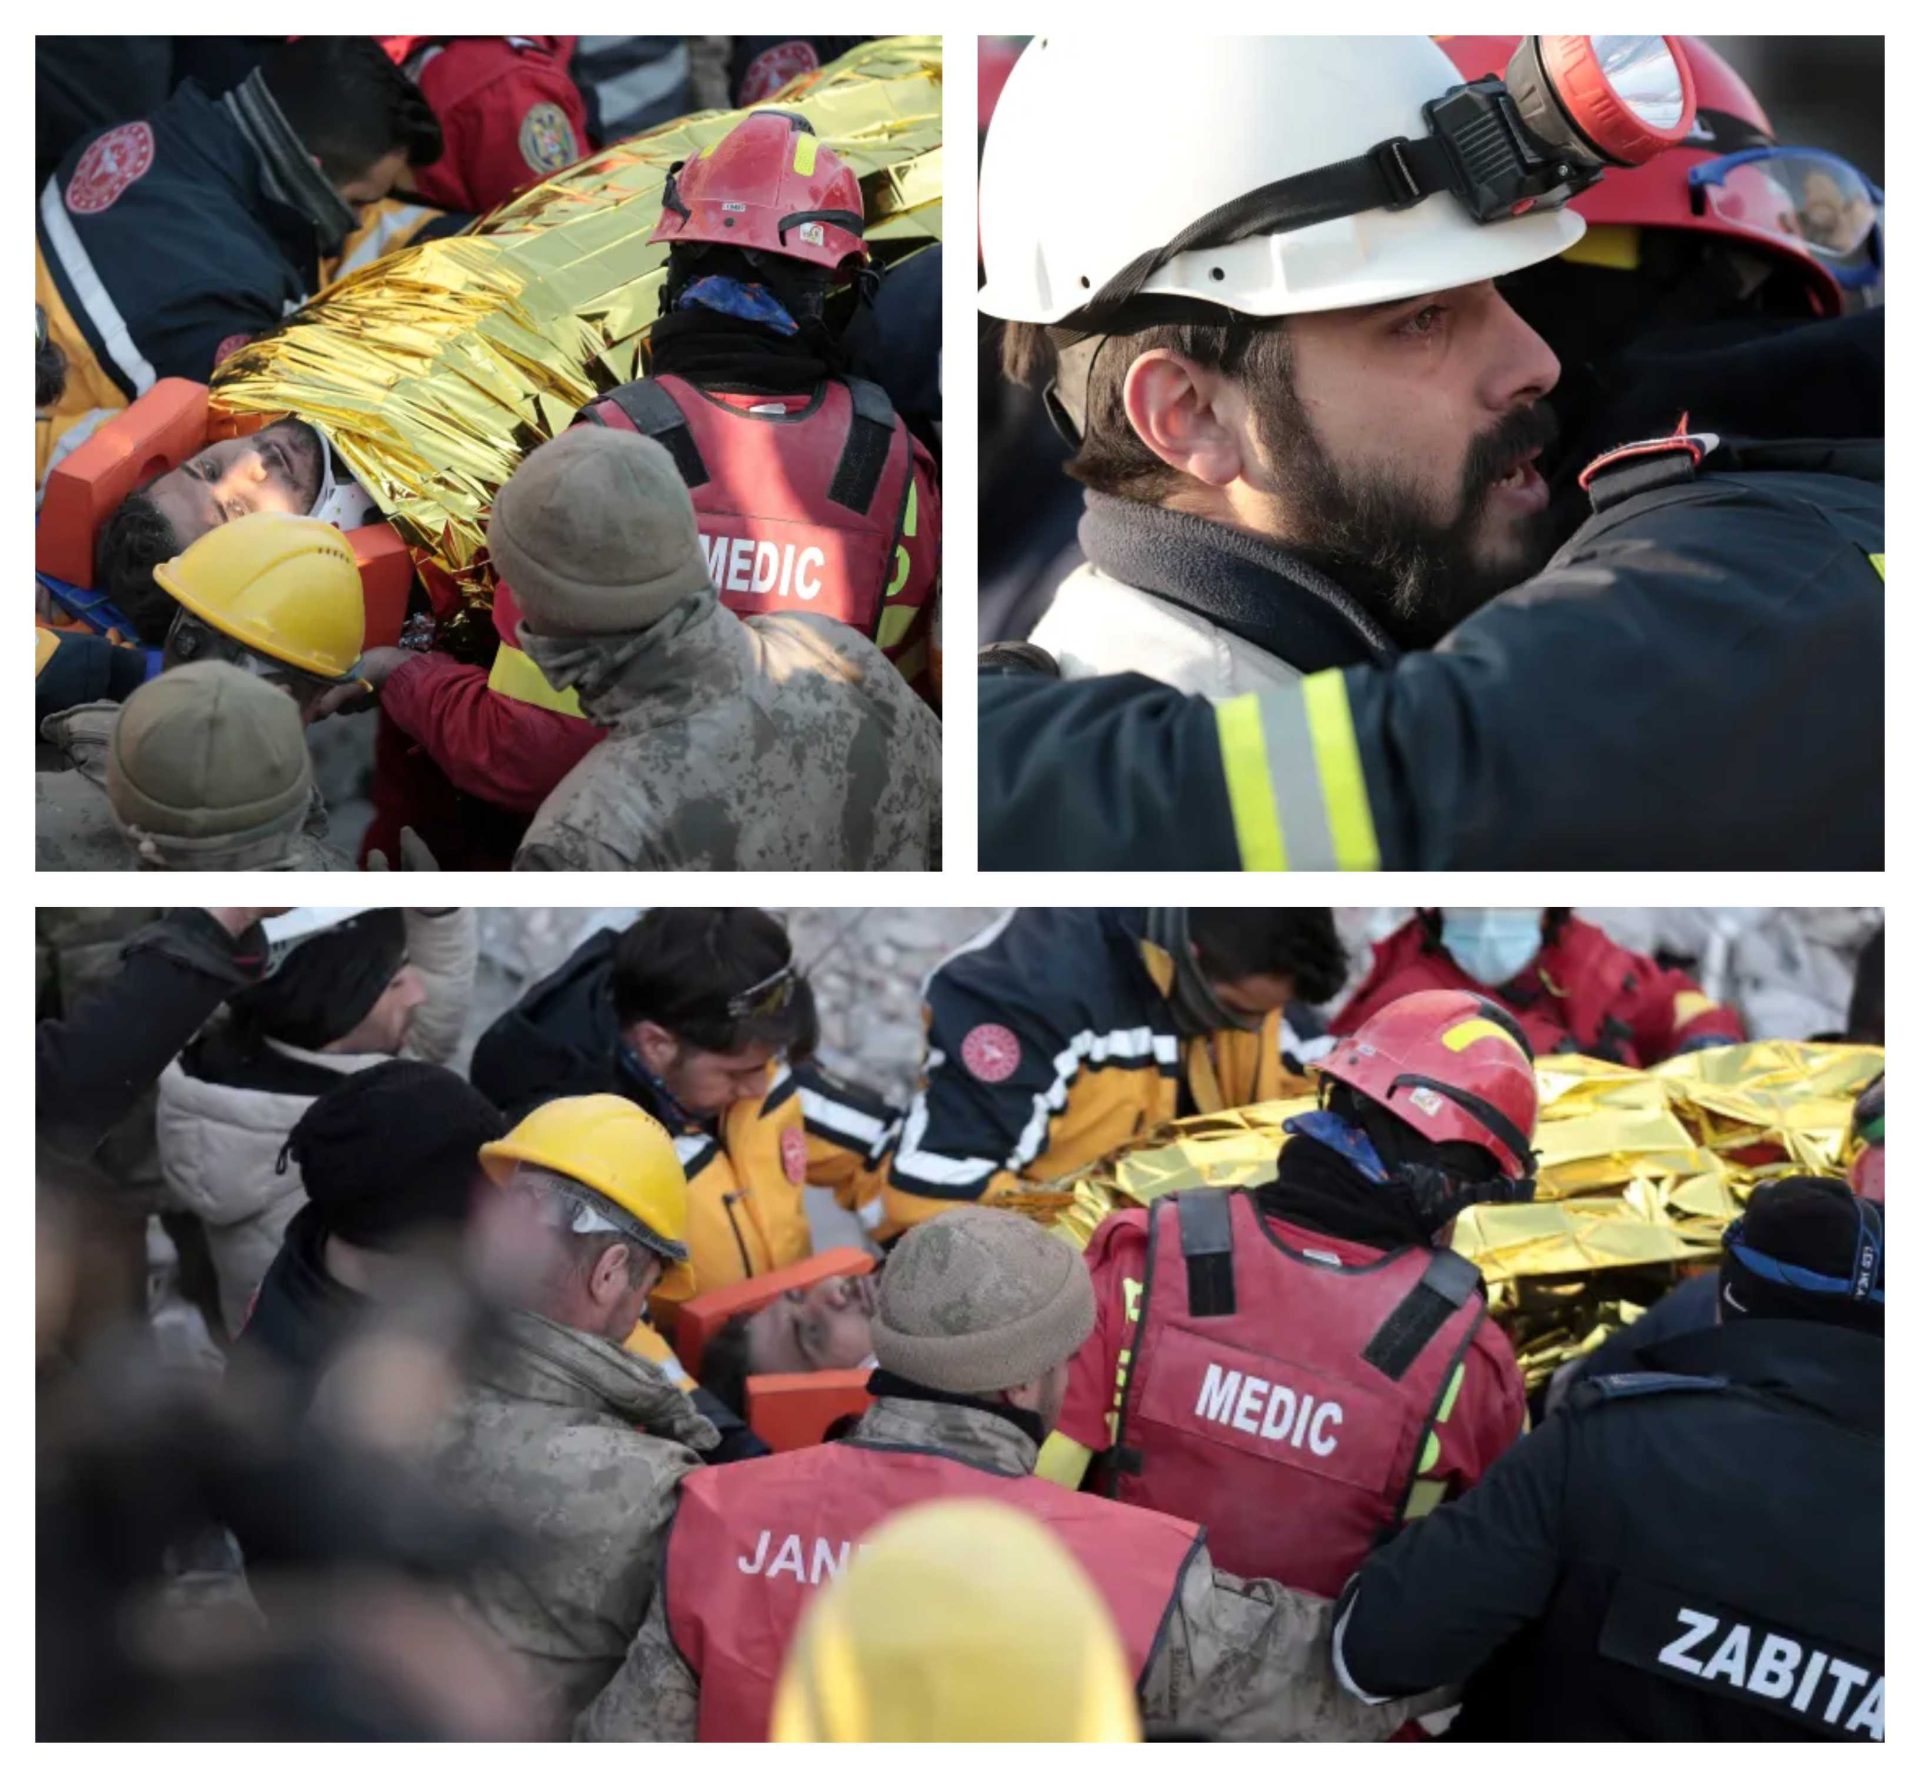 35-year-old Mustafa Sarıgul being rescued from under the rubble